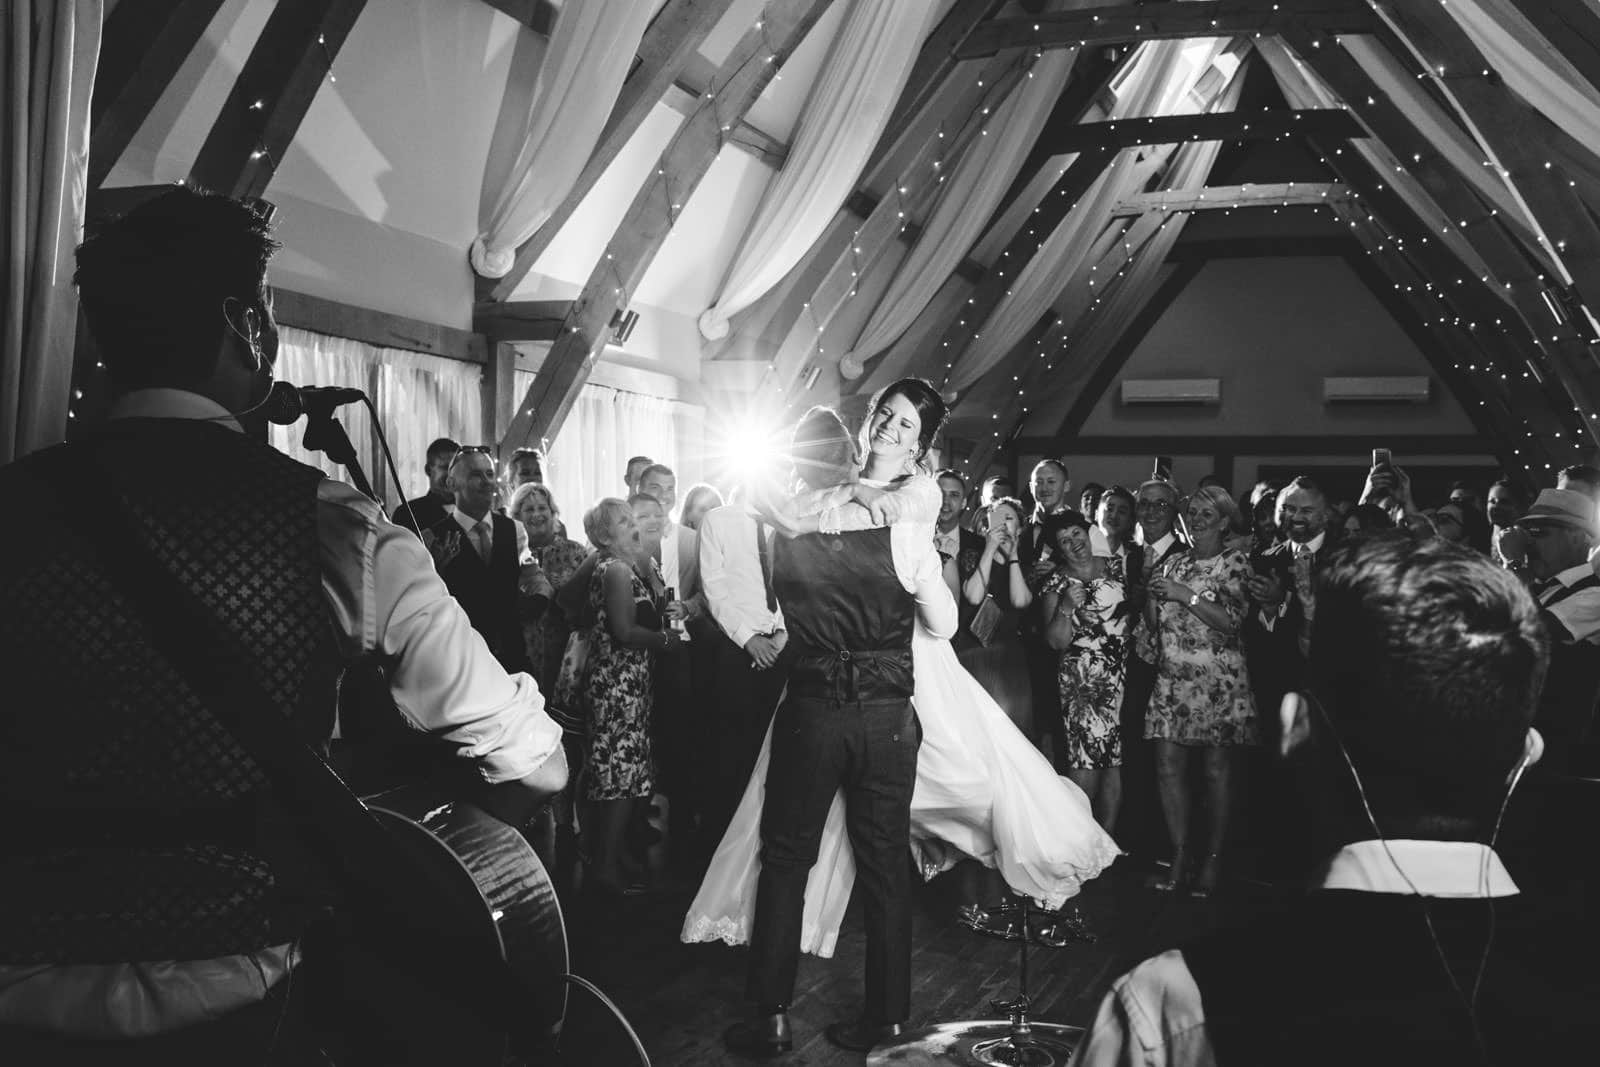 Beautiful first dance wedding photography moment as the bride is lifted up